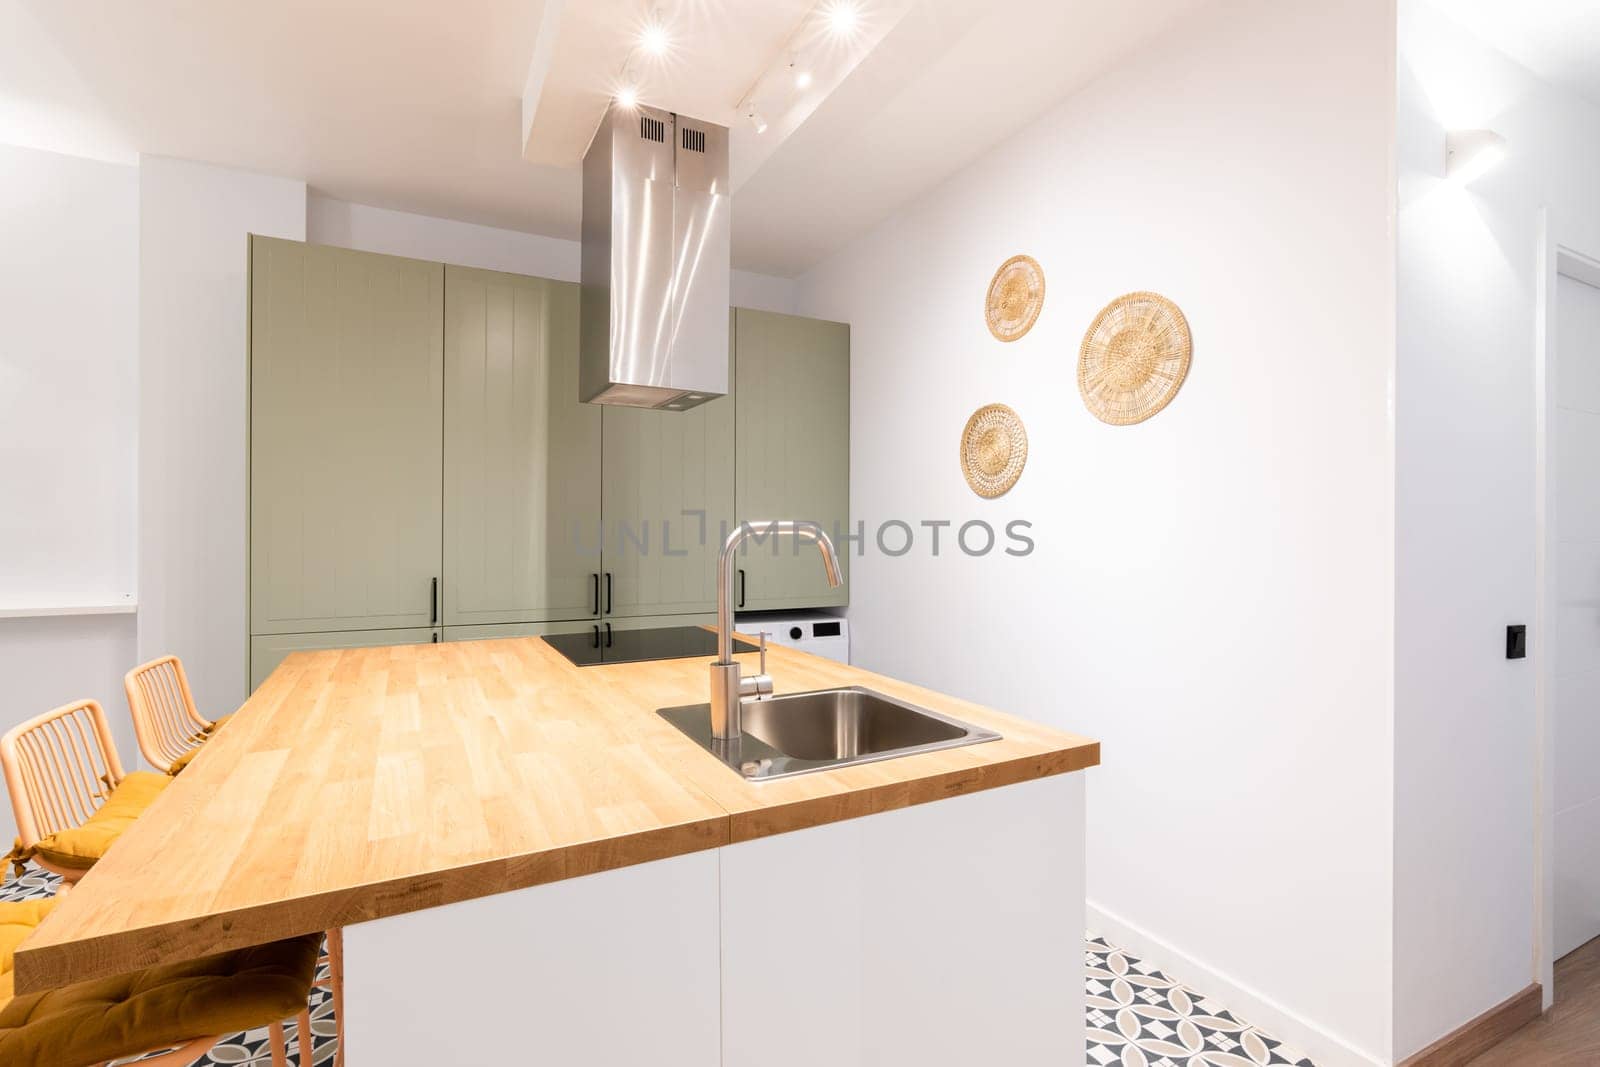 Designer kitchen with bright lighting from wall lamps. Table with sink and faucet in chromed metal. Above the electric stove, system for purifying the air from odors during cooking